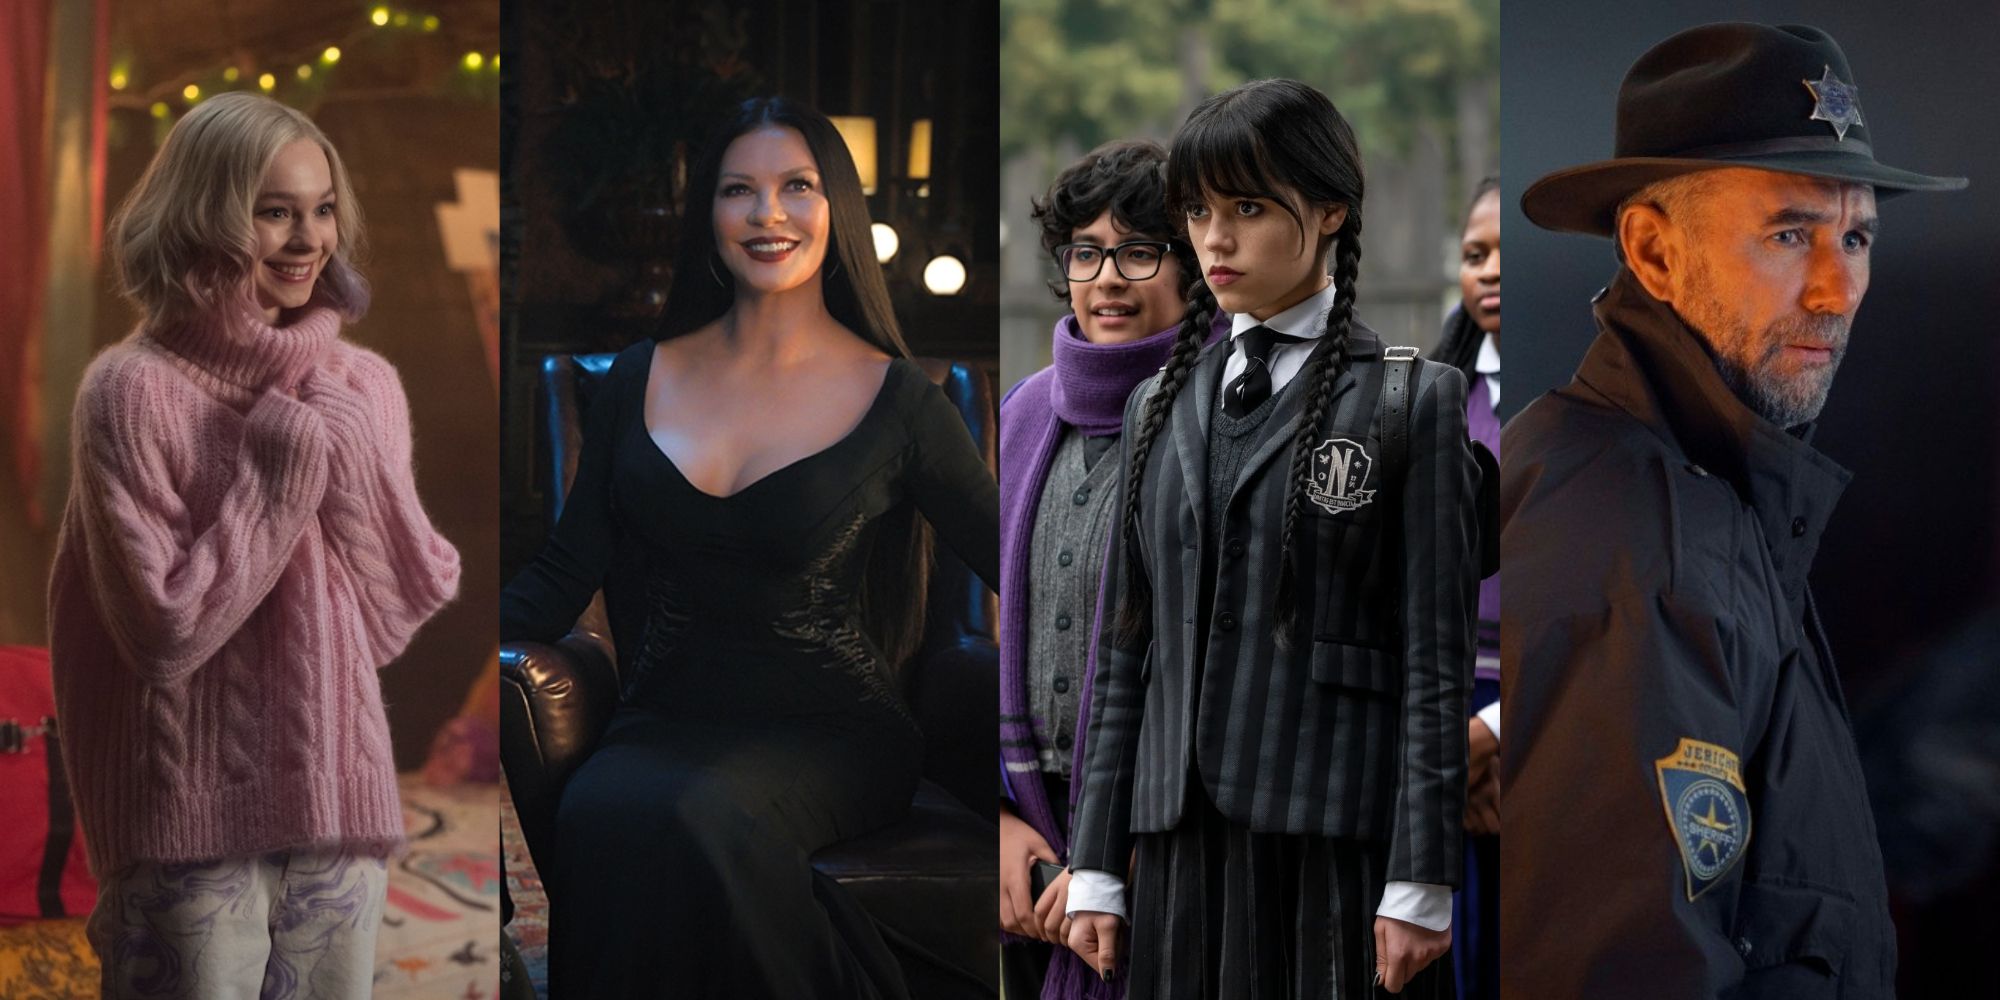 Enid Sinclair, Morticia Addams, Wednesday Addams, and Sheriff Galpin in Wednesday 2022